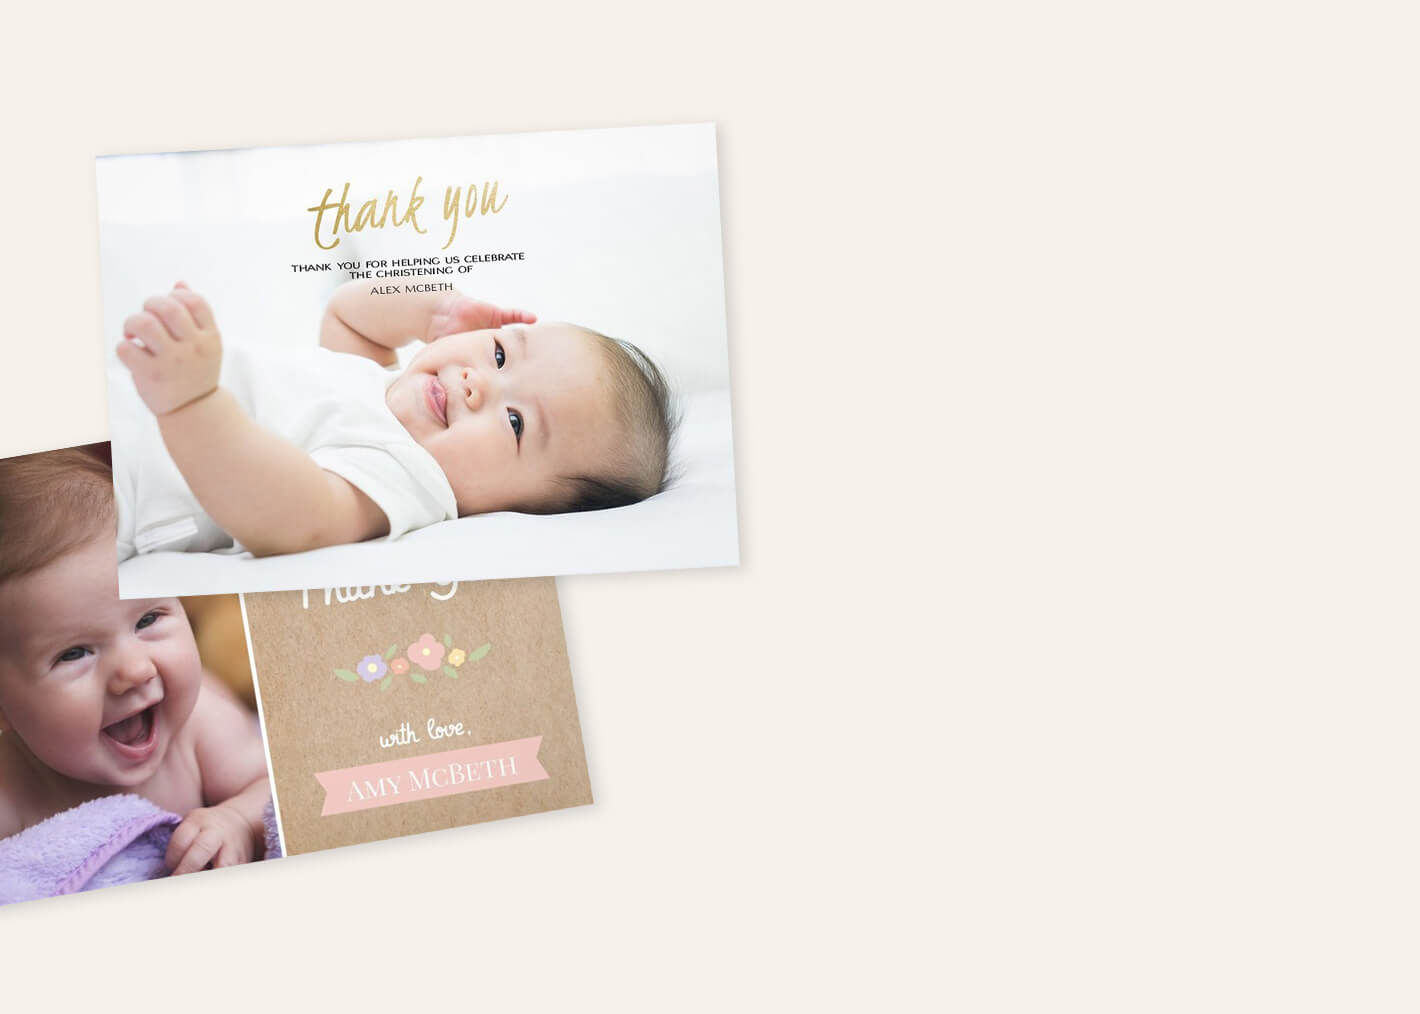 Christening Guest Book or Small Photo Book Personalised Gift for Baby Boy -   Sweden